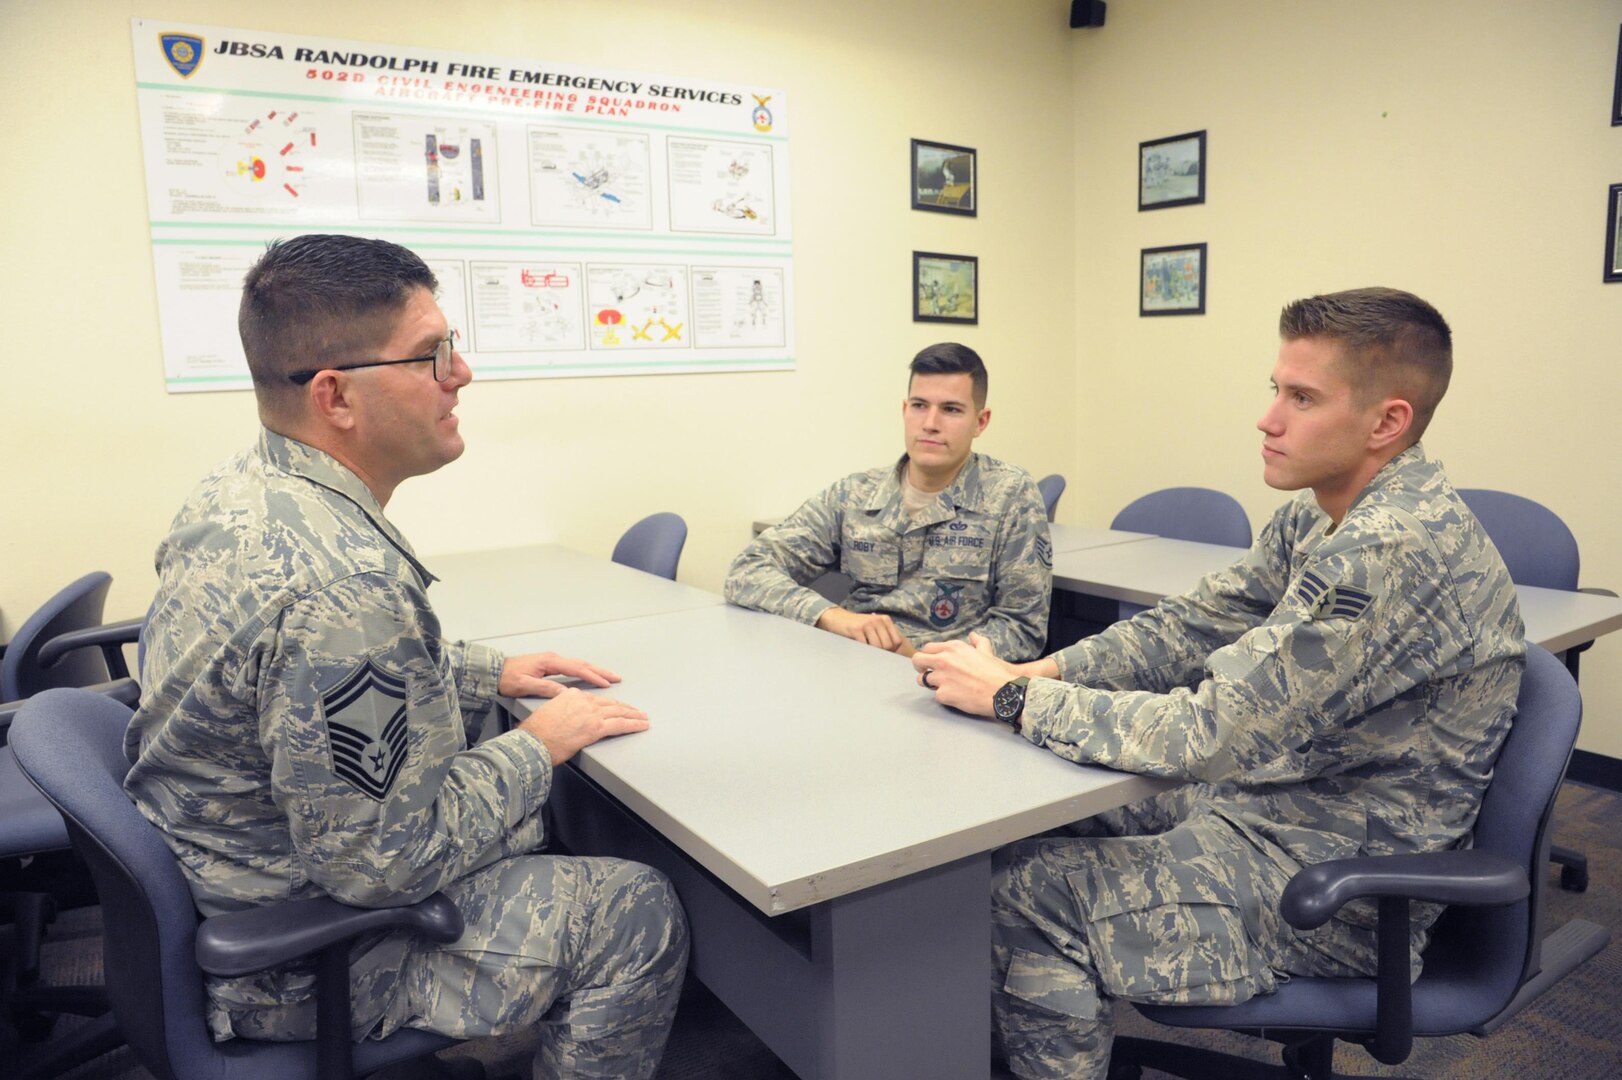 Senior Master Sgt. Lloyd Stinson, 502nd Air Base Wing, 902nd Security Forces Logistics Readiness Squadron, deputy fire chief, mentors Senior Airman Brice Haylett and Staff Sgt. Allen Roby at Joint Base San Antonio-Randolph, Jan. 11.  Mentoring is a critical component for members of the Air Force. It is normally a relationship in which a person with greater experience and wisdom guides another person to develop both personally and professionally.